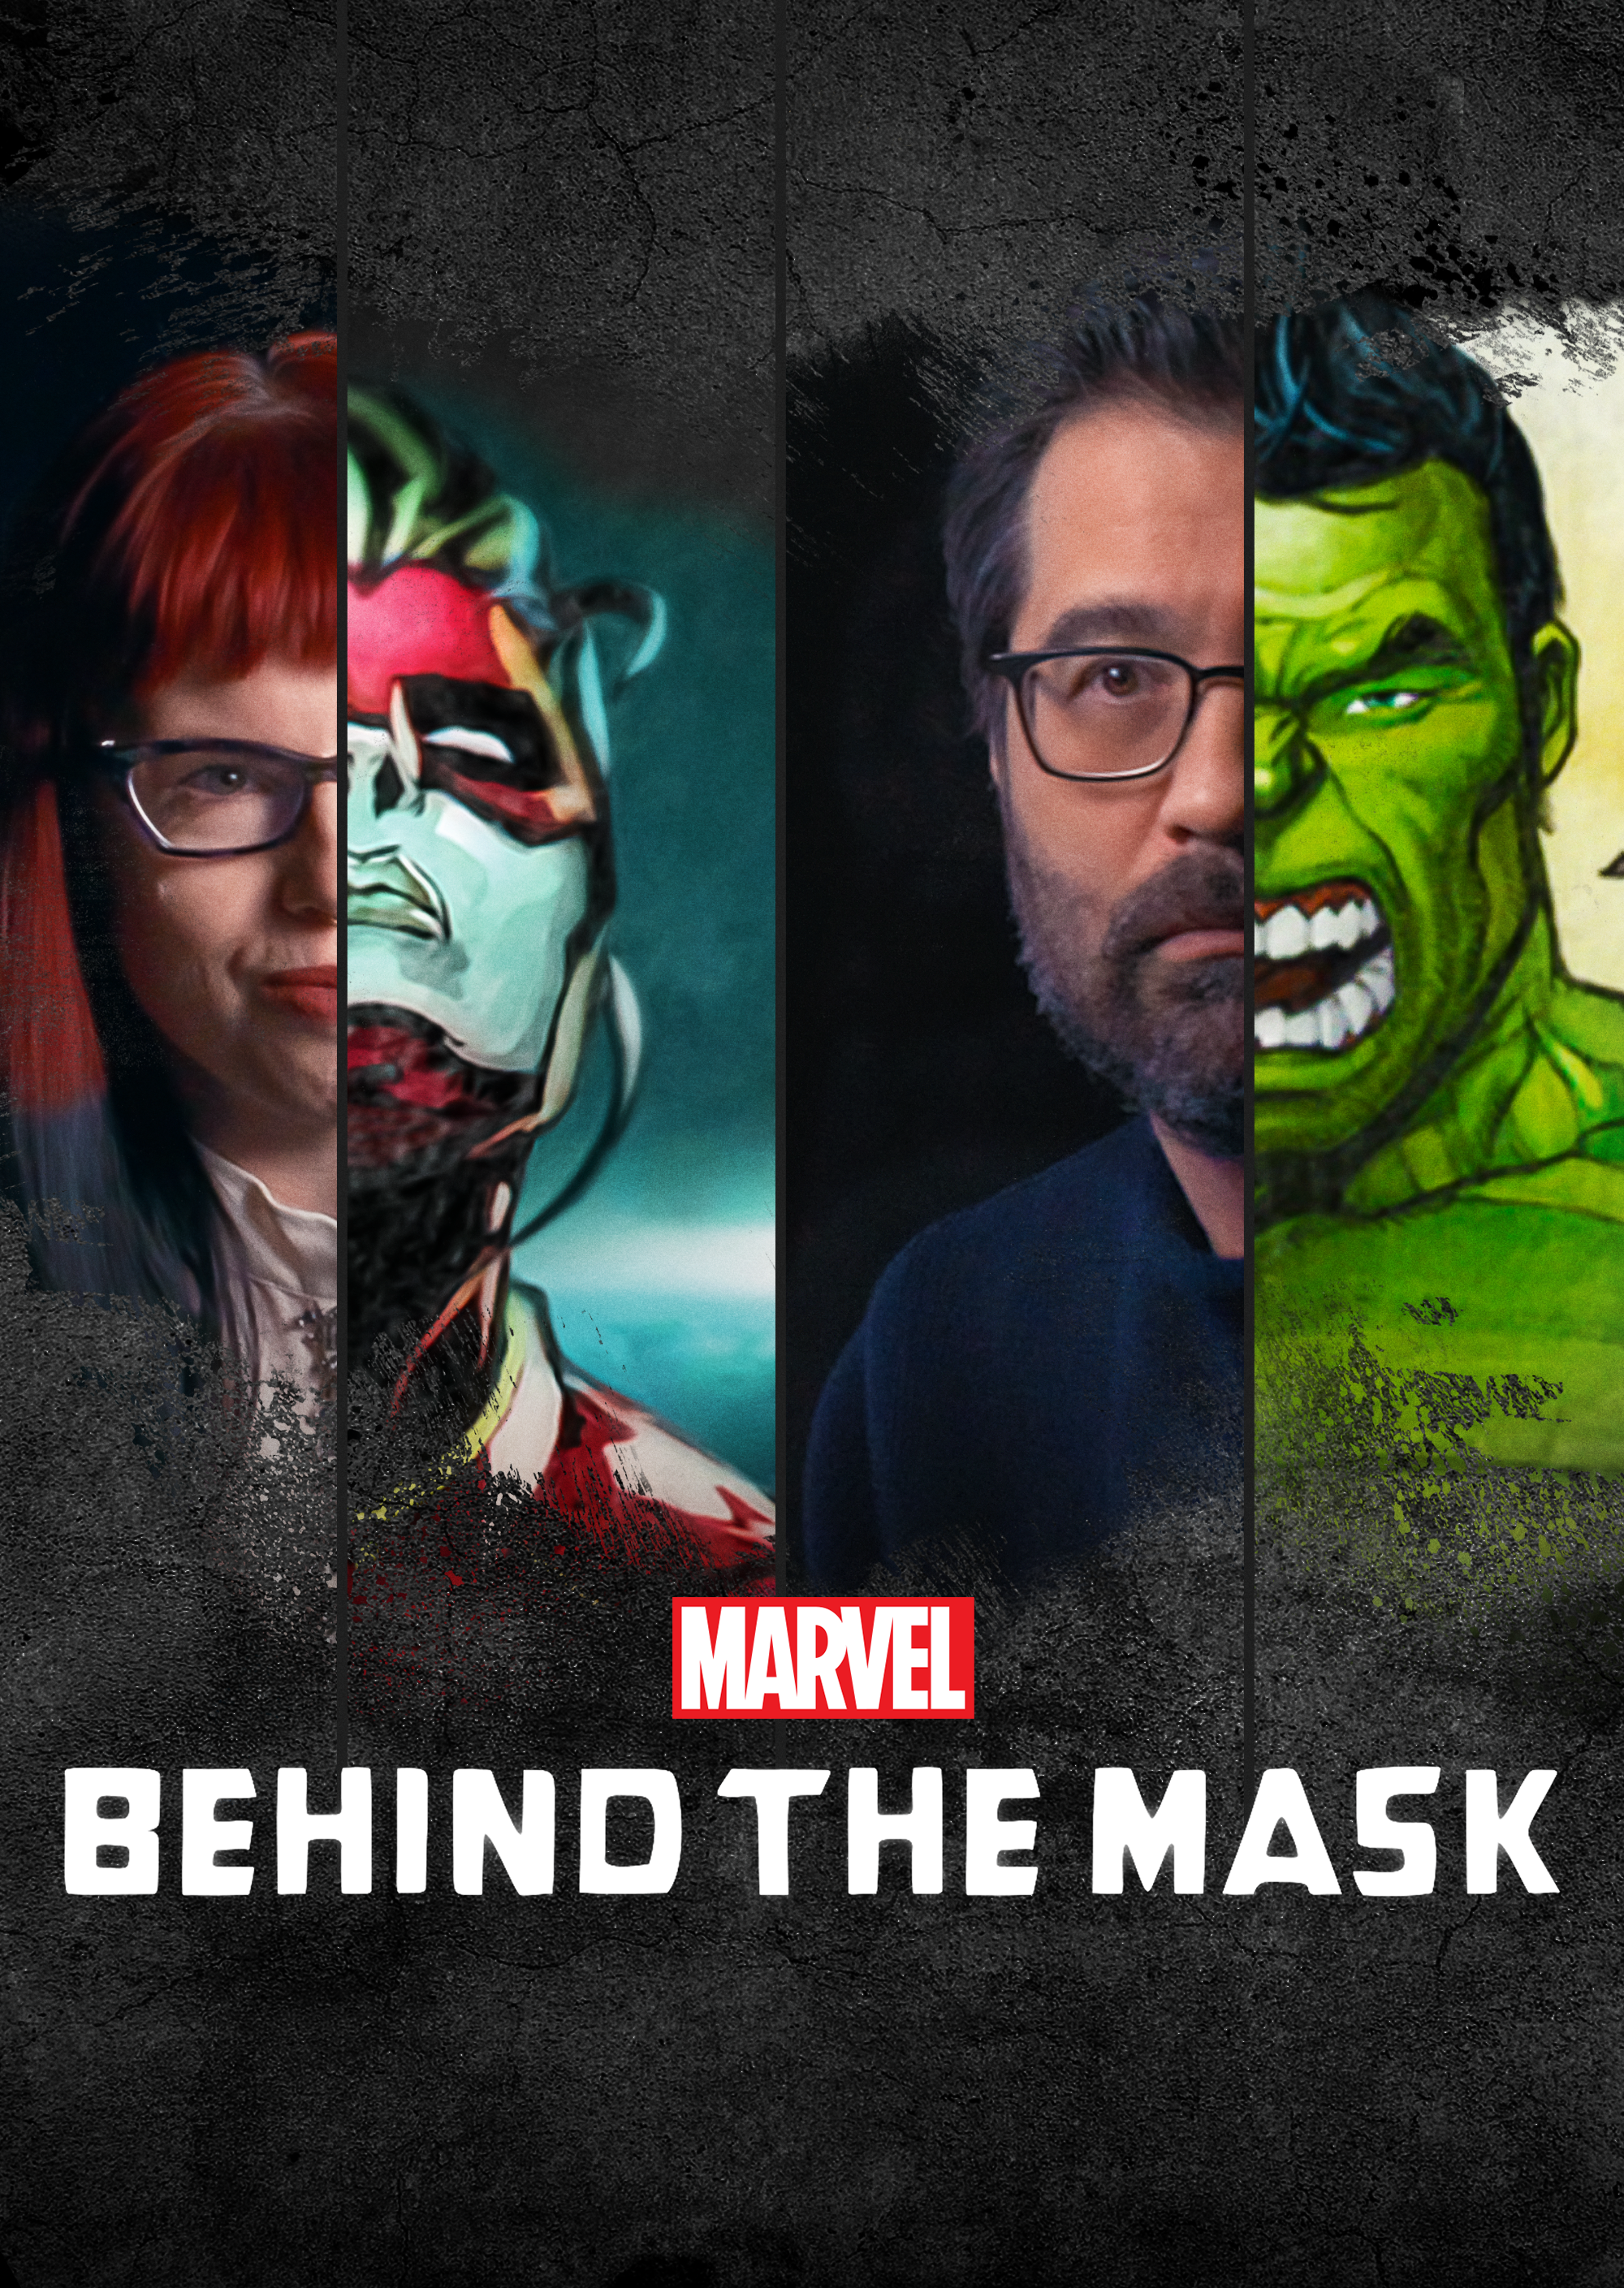 Marvel's Behind the Mask.